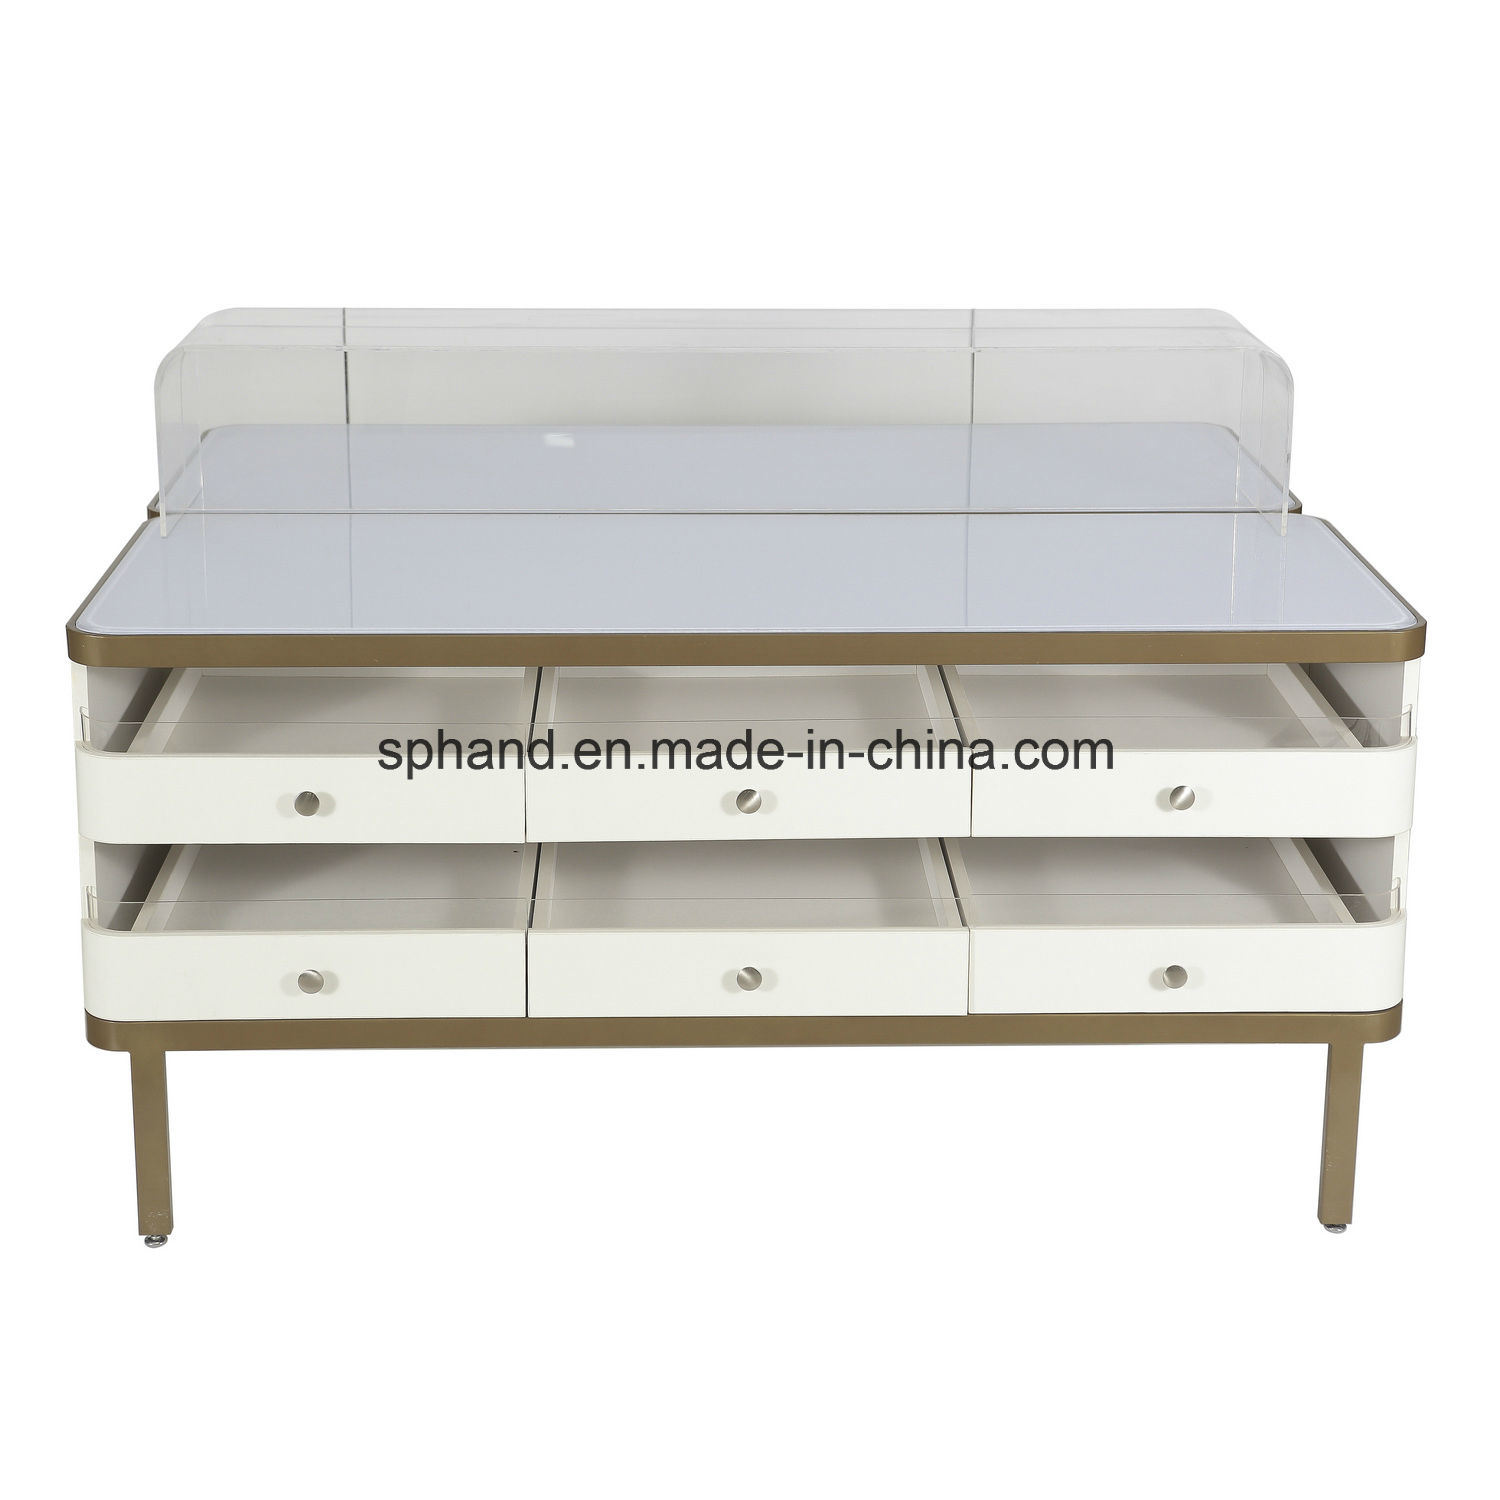 Three Level Drawer Deisgn Promotional Table for Accessories/Garment